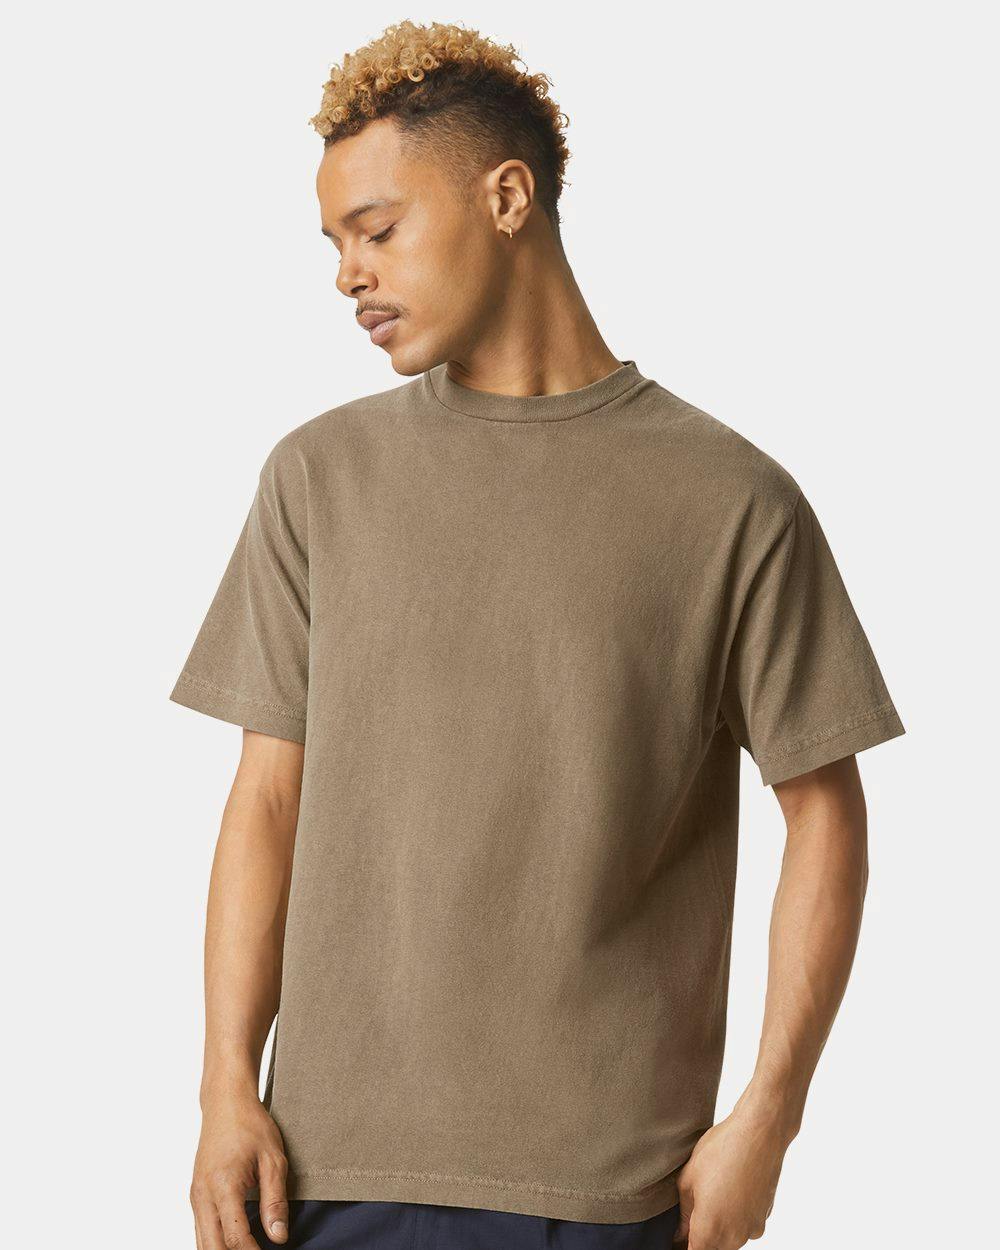 Image for Garment-Dyed Heavyweight Cotton Tee - 1301GD